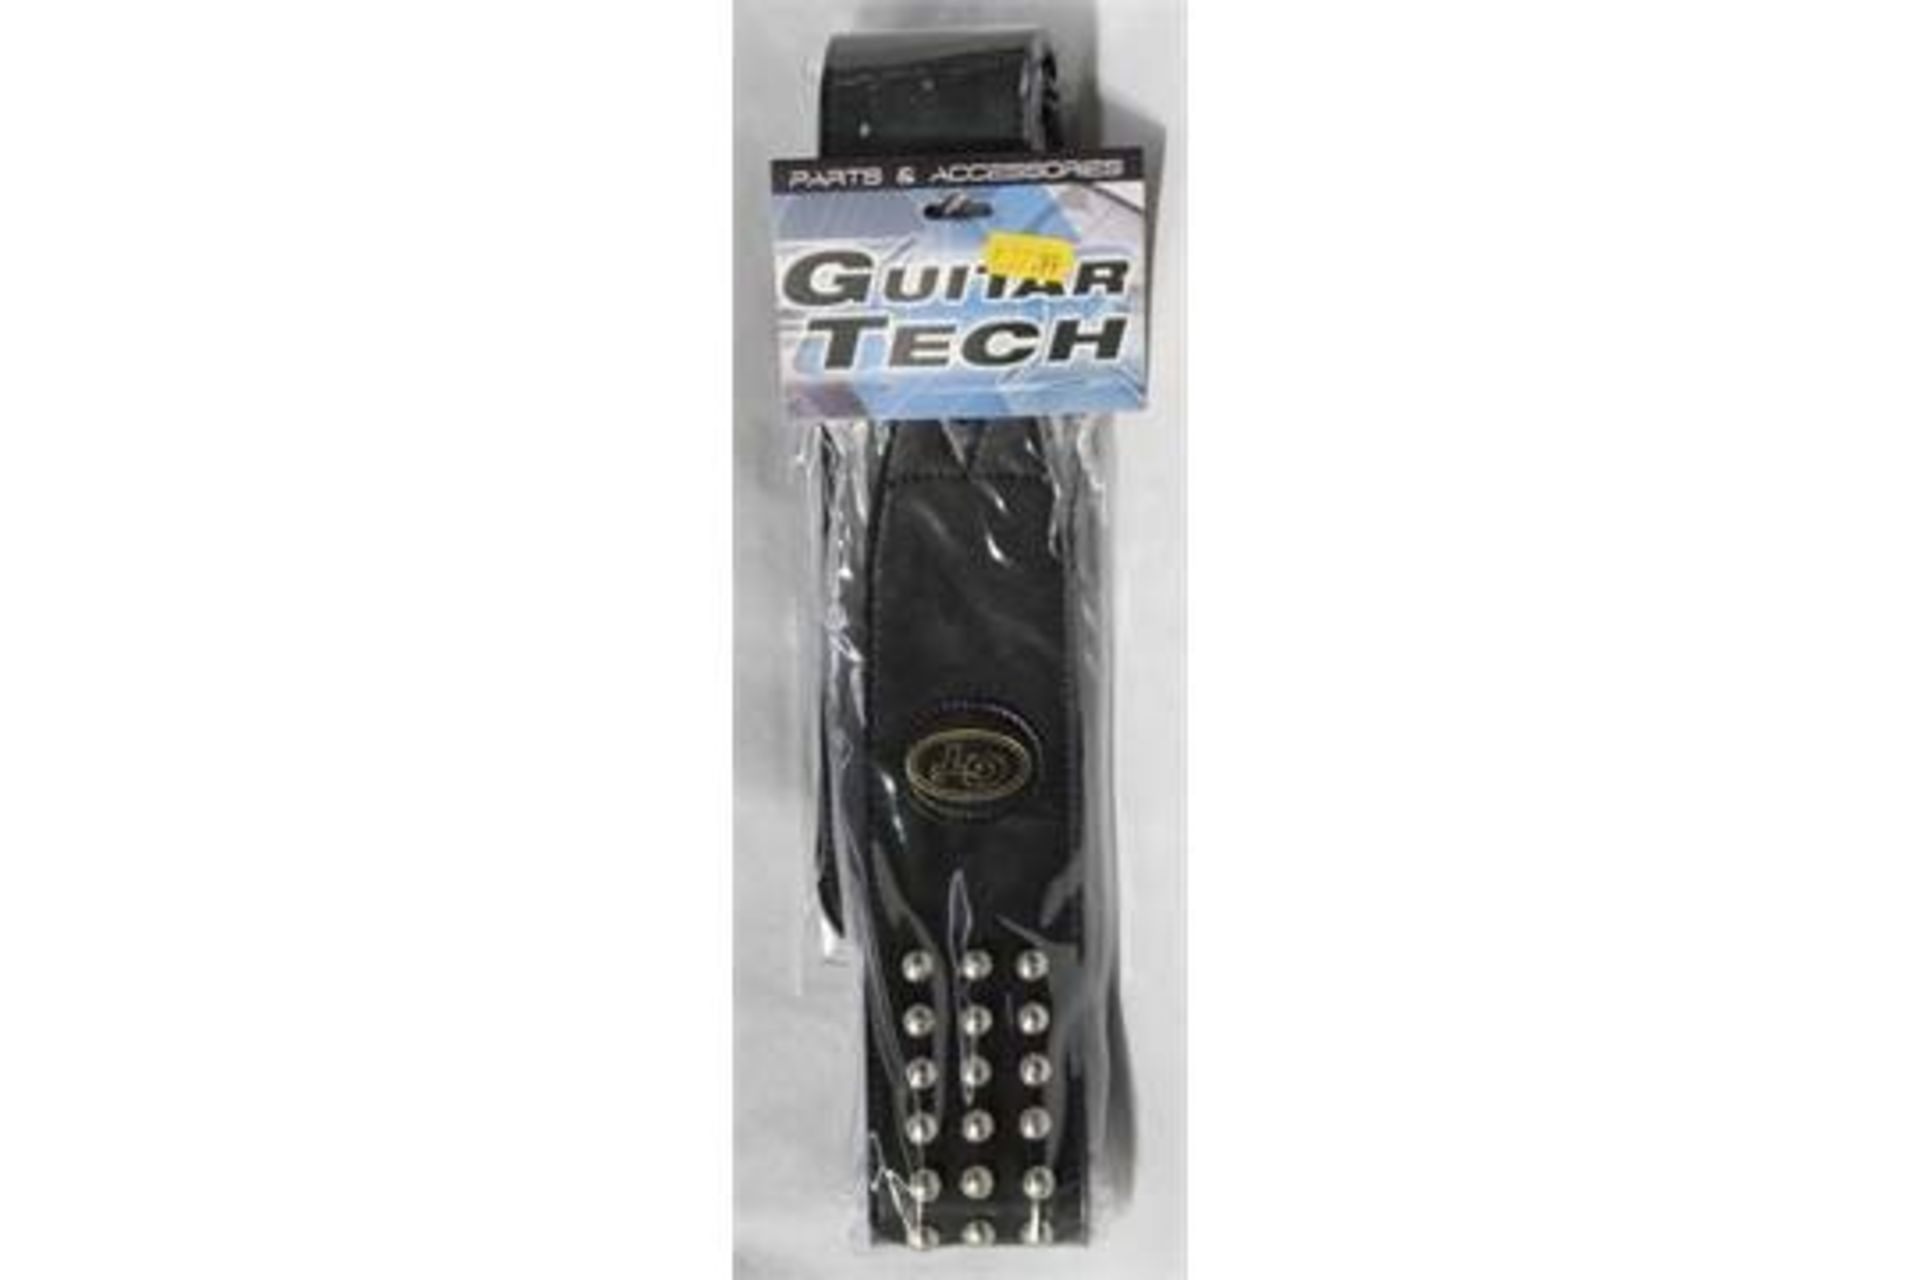 1 x Guitar Tech Leather Studded Guitar Strap - New in Packet - CL020 - Ref Pro173 - Location: Altrin - Image 8 of 8